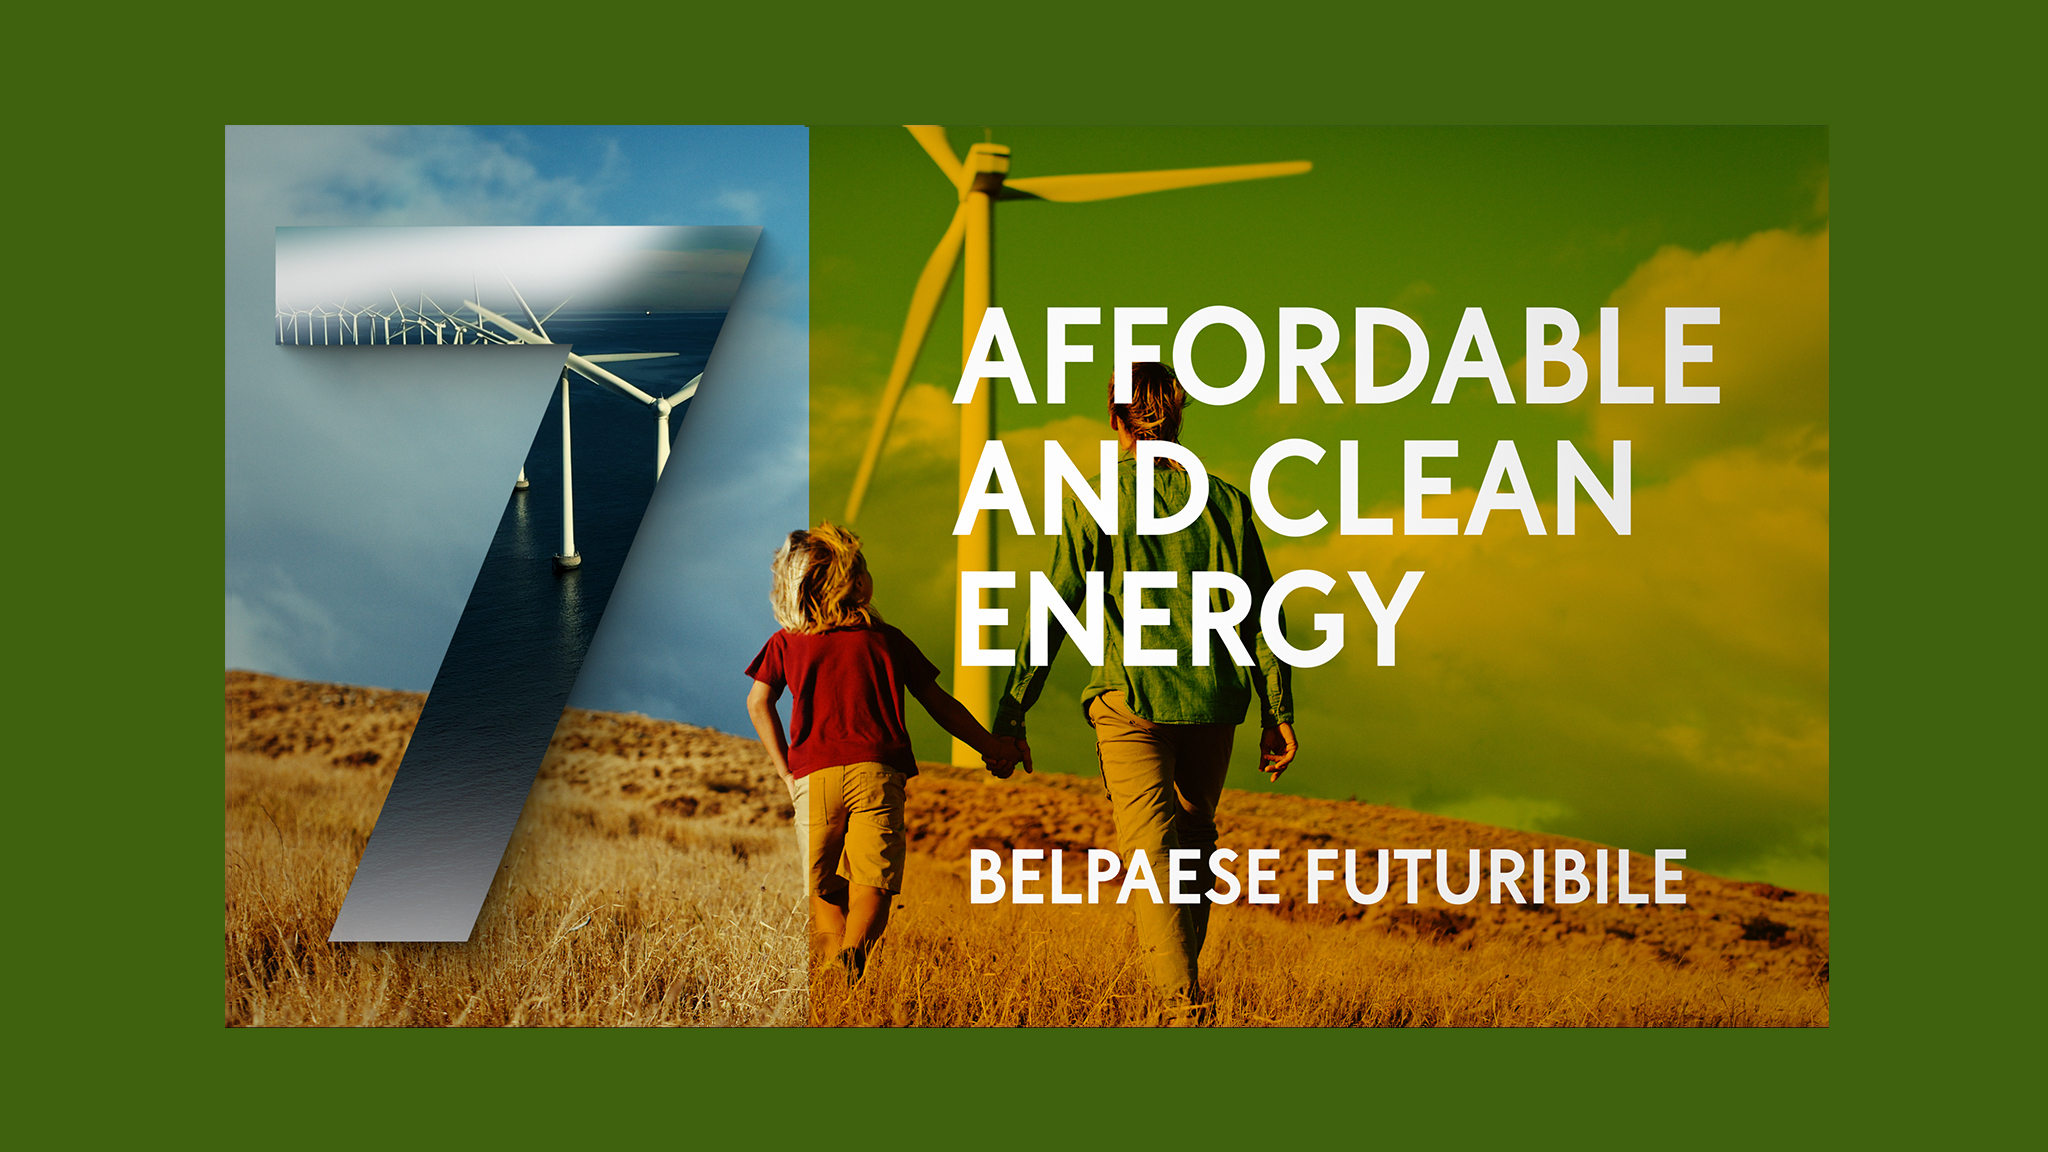 Affordable and clean energy / Belpaese Futuribile